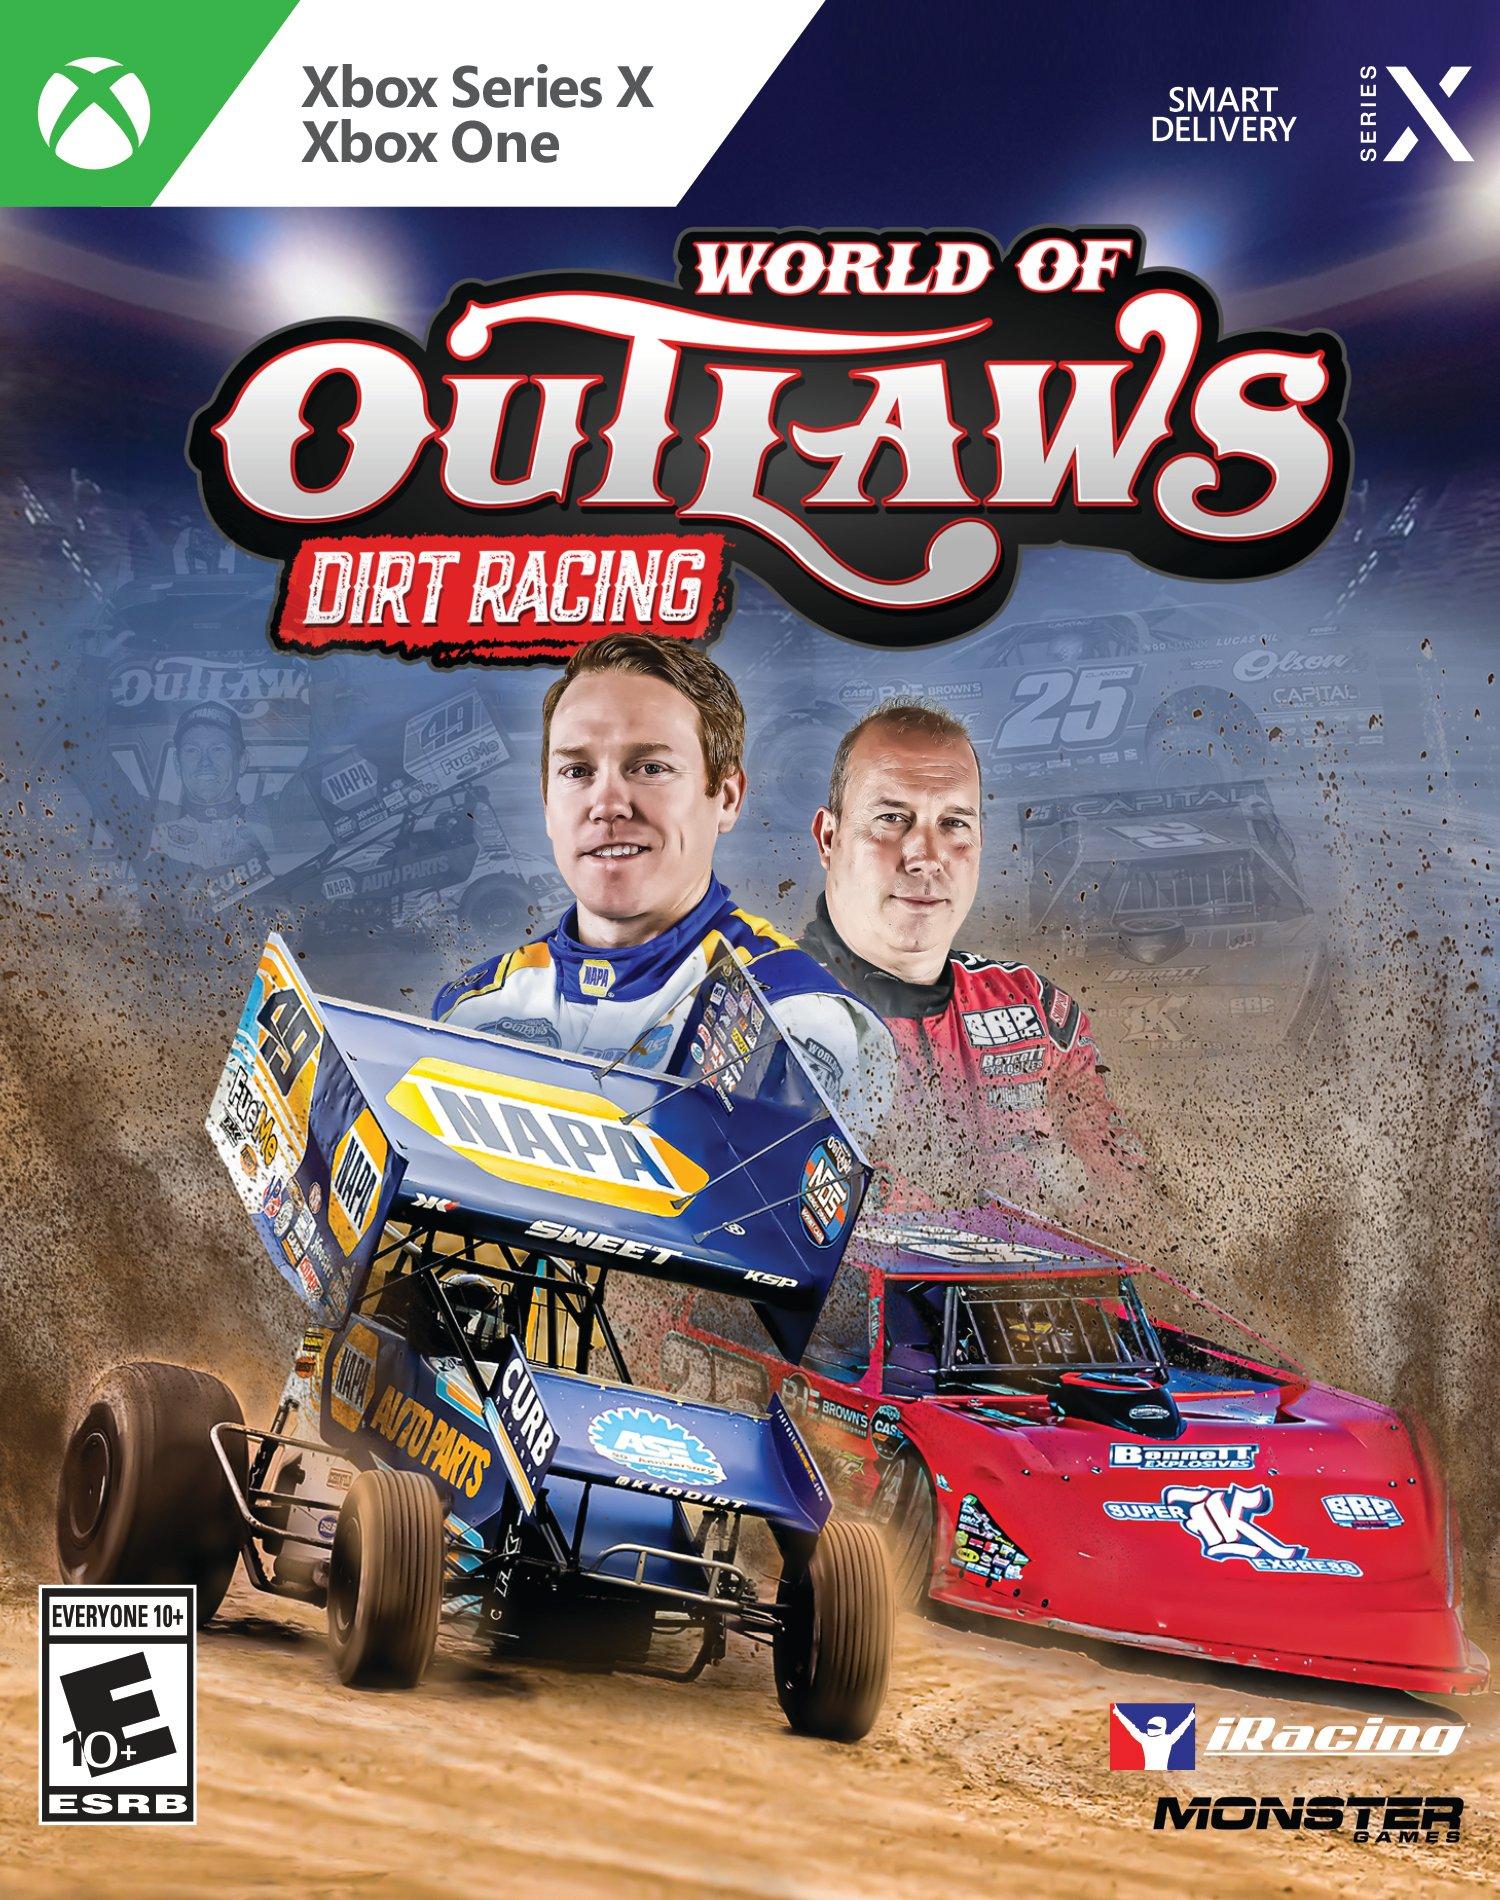 World of Outlaws Dirt Racing Xbox Series X